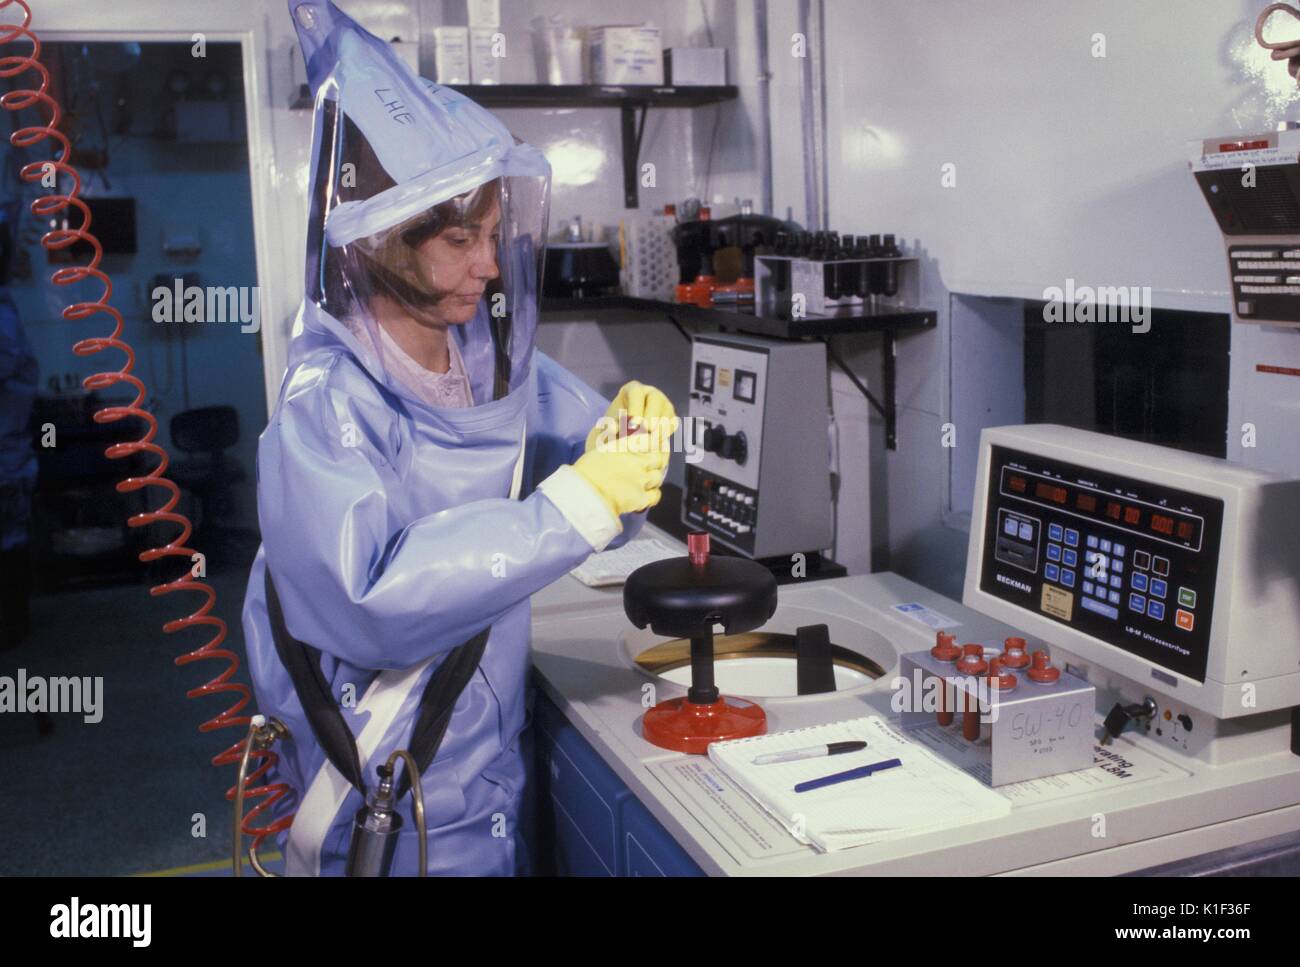 A CDC scientist conducts laboratory research in the Biosafety Level-4 laboratory, Atlanta, GA. LabScience, A CDC scientist wearing a protective suit with helmet and face mask is protected from pathogens as she conducts studies in the CDC BSL-4 laboratory. Image courtesy CDC, 2002. Stock Photo